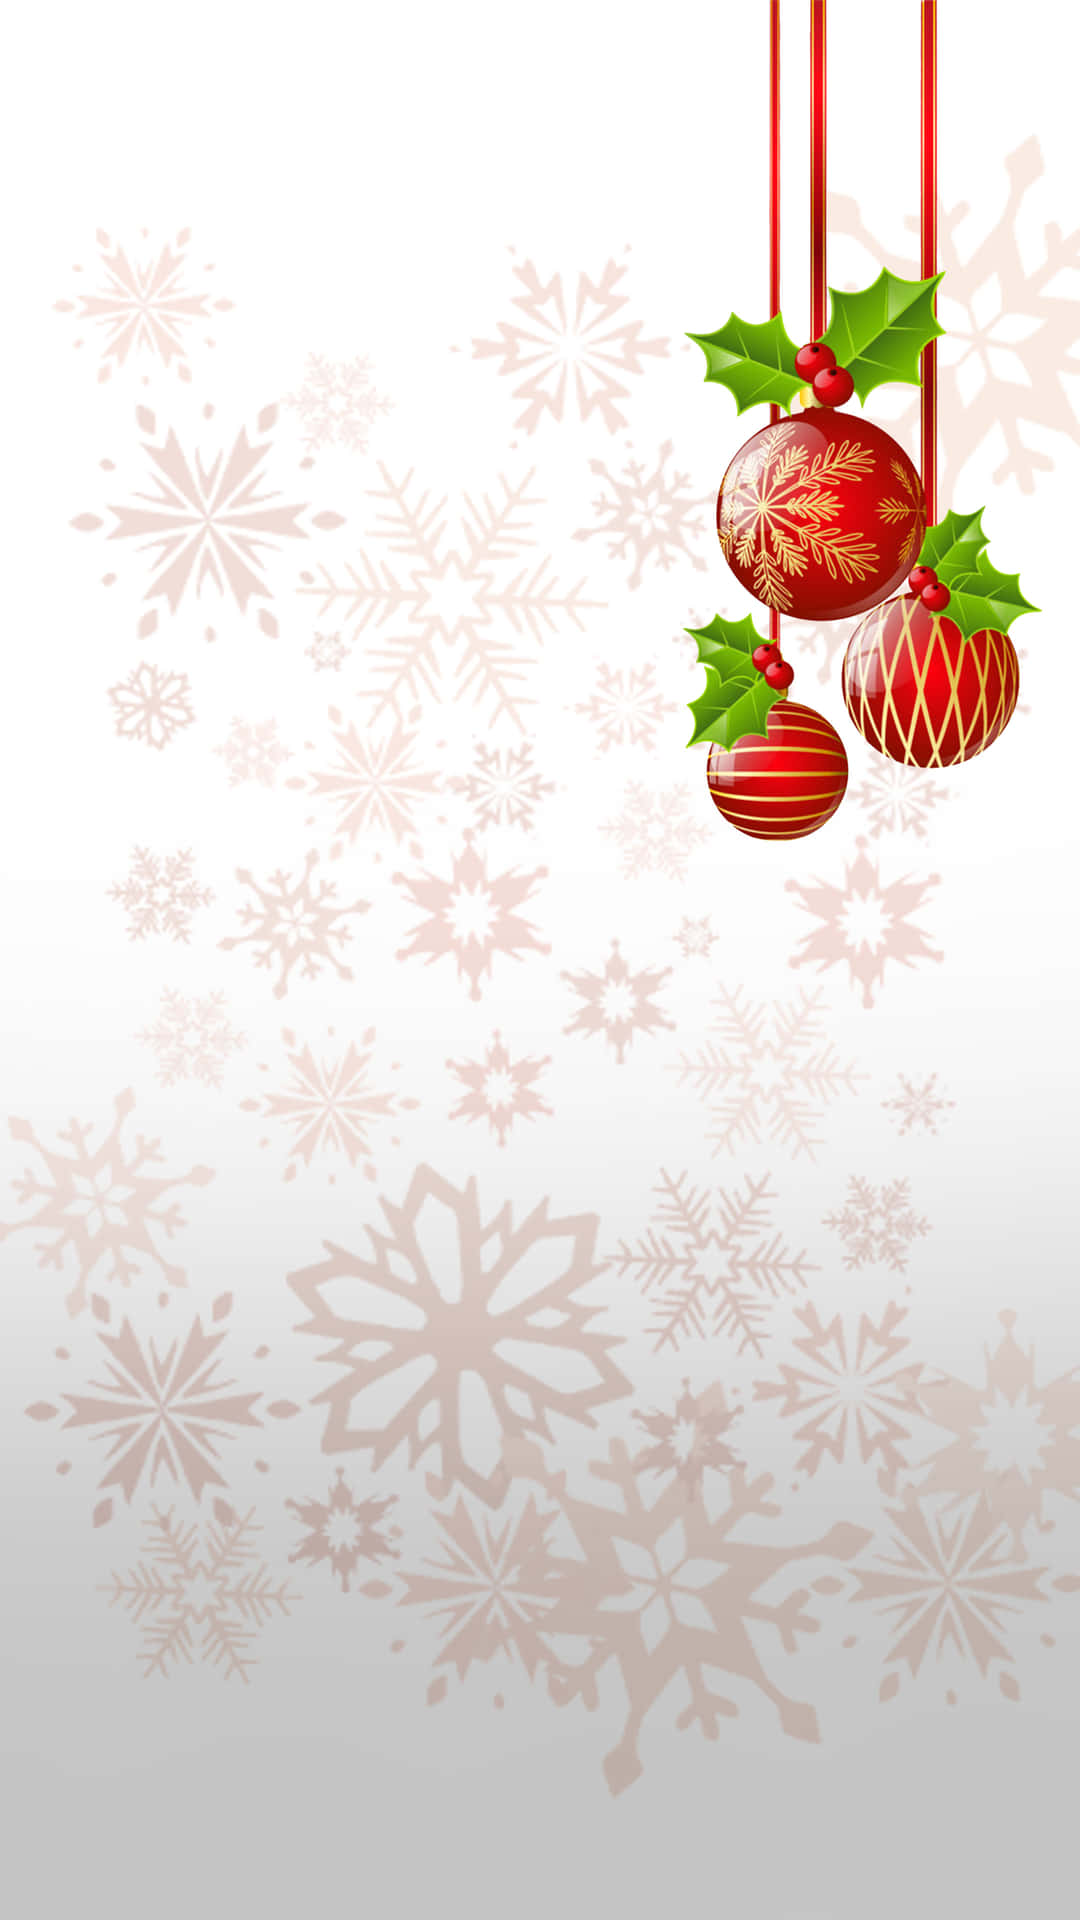 Festive Christmas Background with Ornaments and Decorations Wallpaper